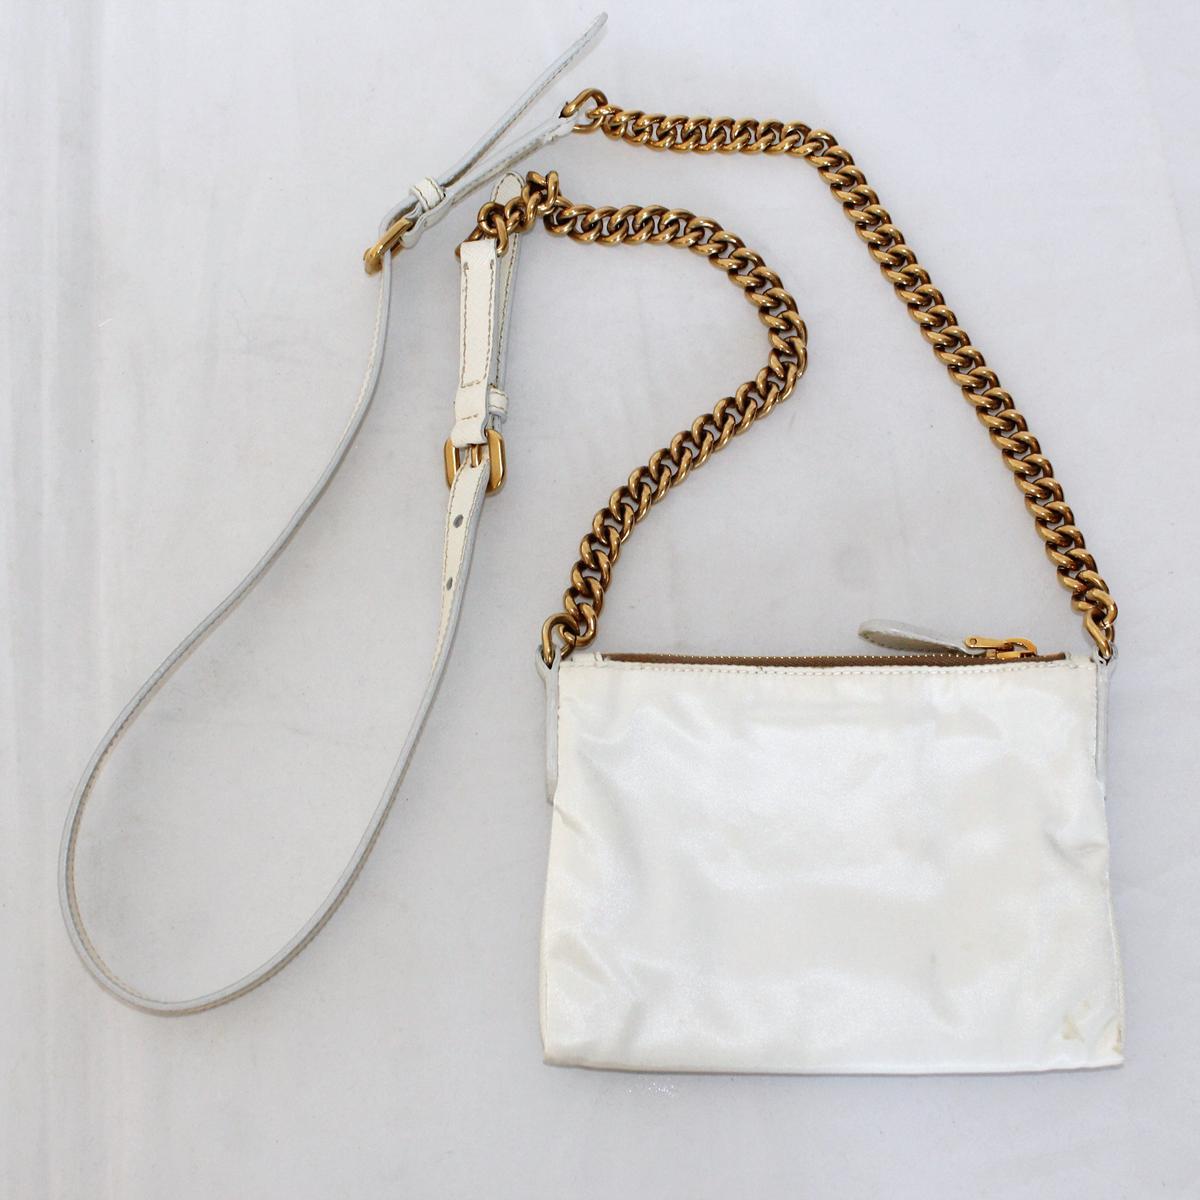 Very chic !
Sail cloth 
Ivory color
Golden chain
Leather strap
Golden written on leather insert
Zip closure
Small internal pocket 
Cm 17 x 13 (6.69 x 5.13 inches)


Worldwide express shipping included in the price !